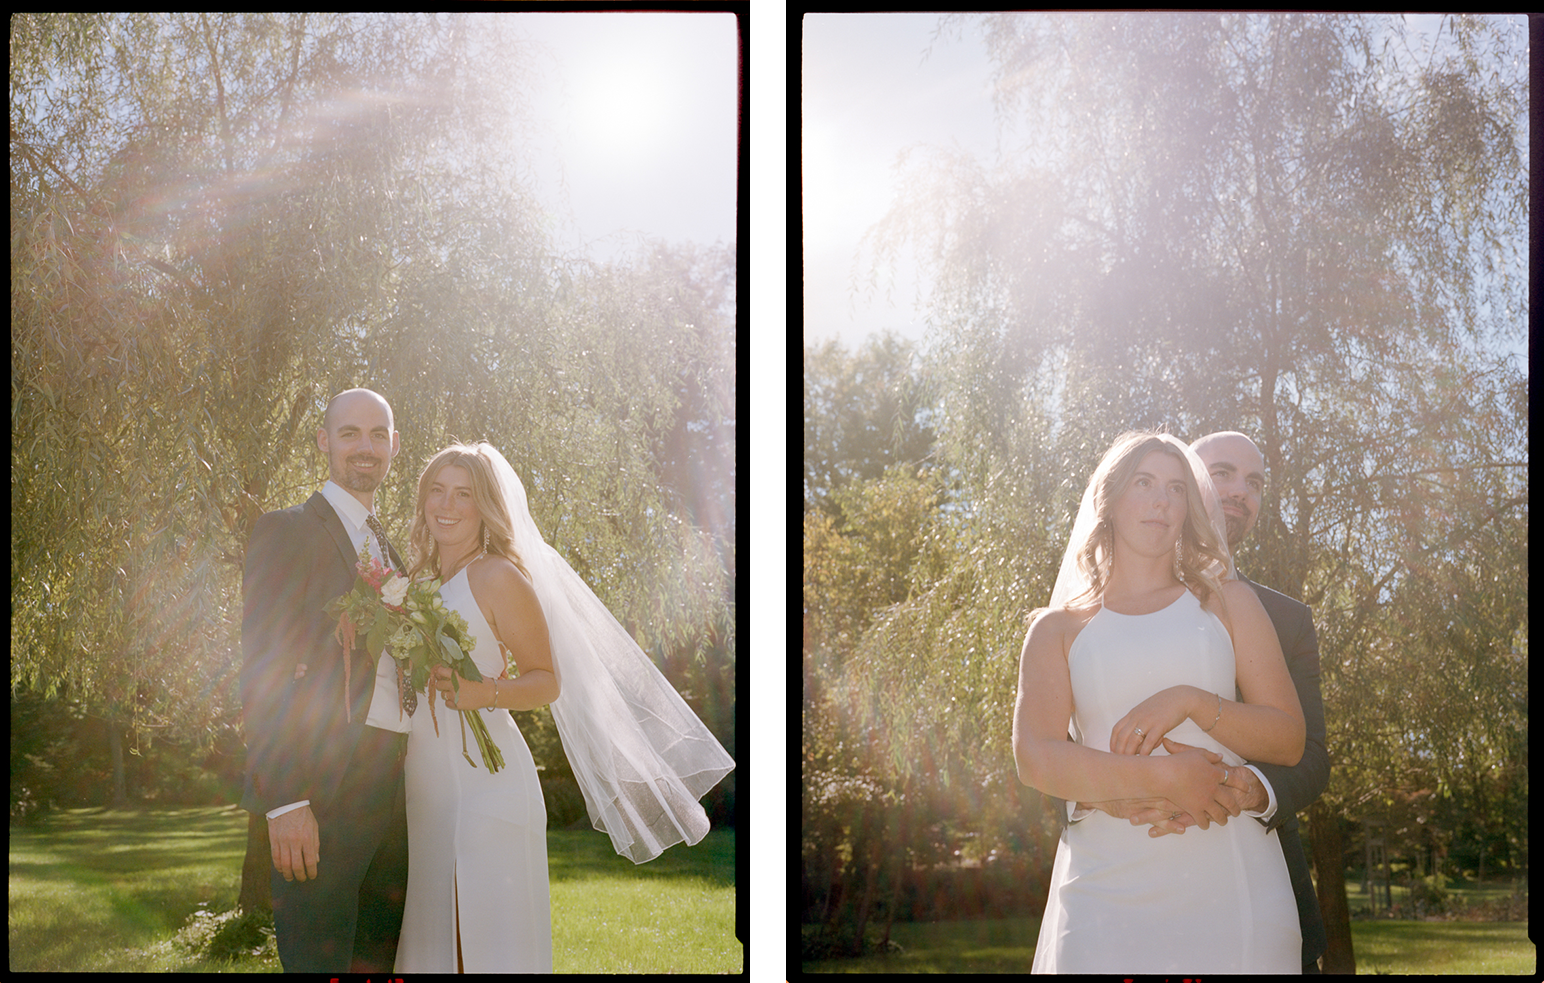 Backyard-Elopement-on-Film-Analog-Pool-Party-58.PNG